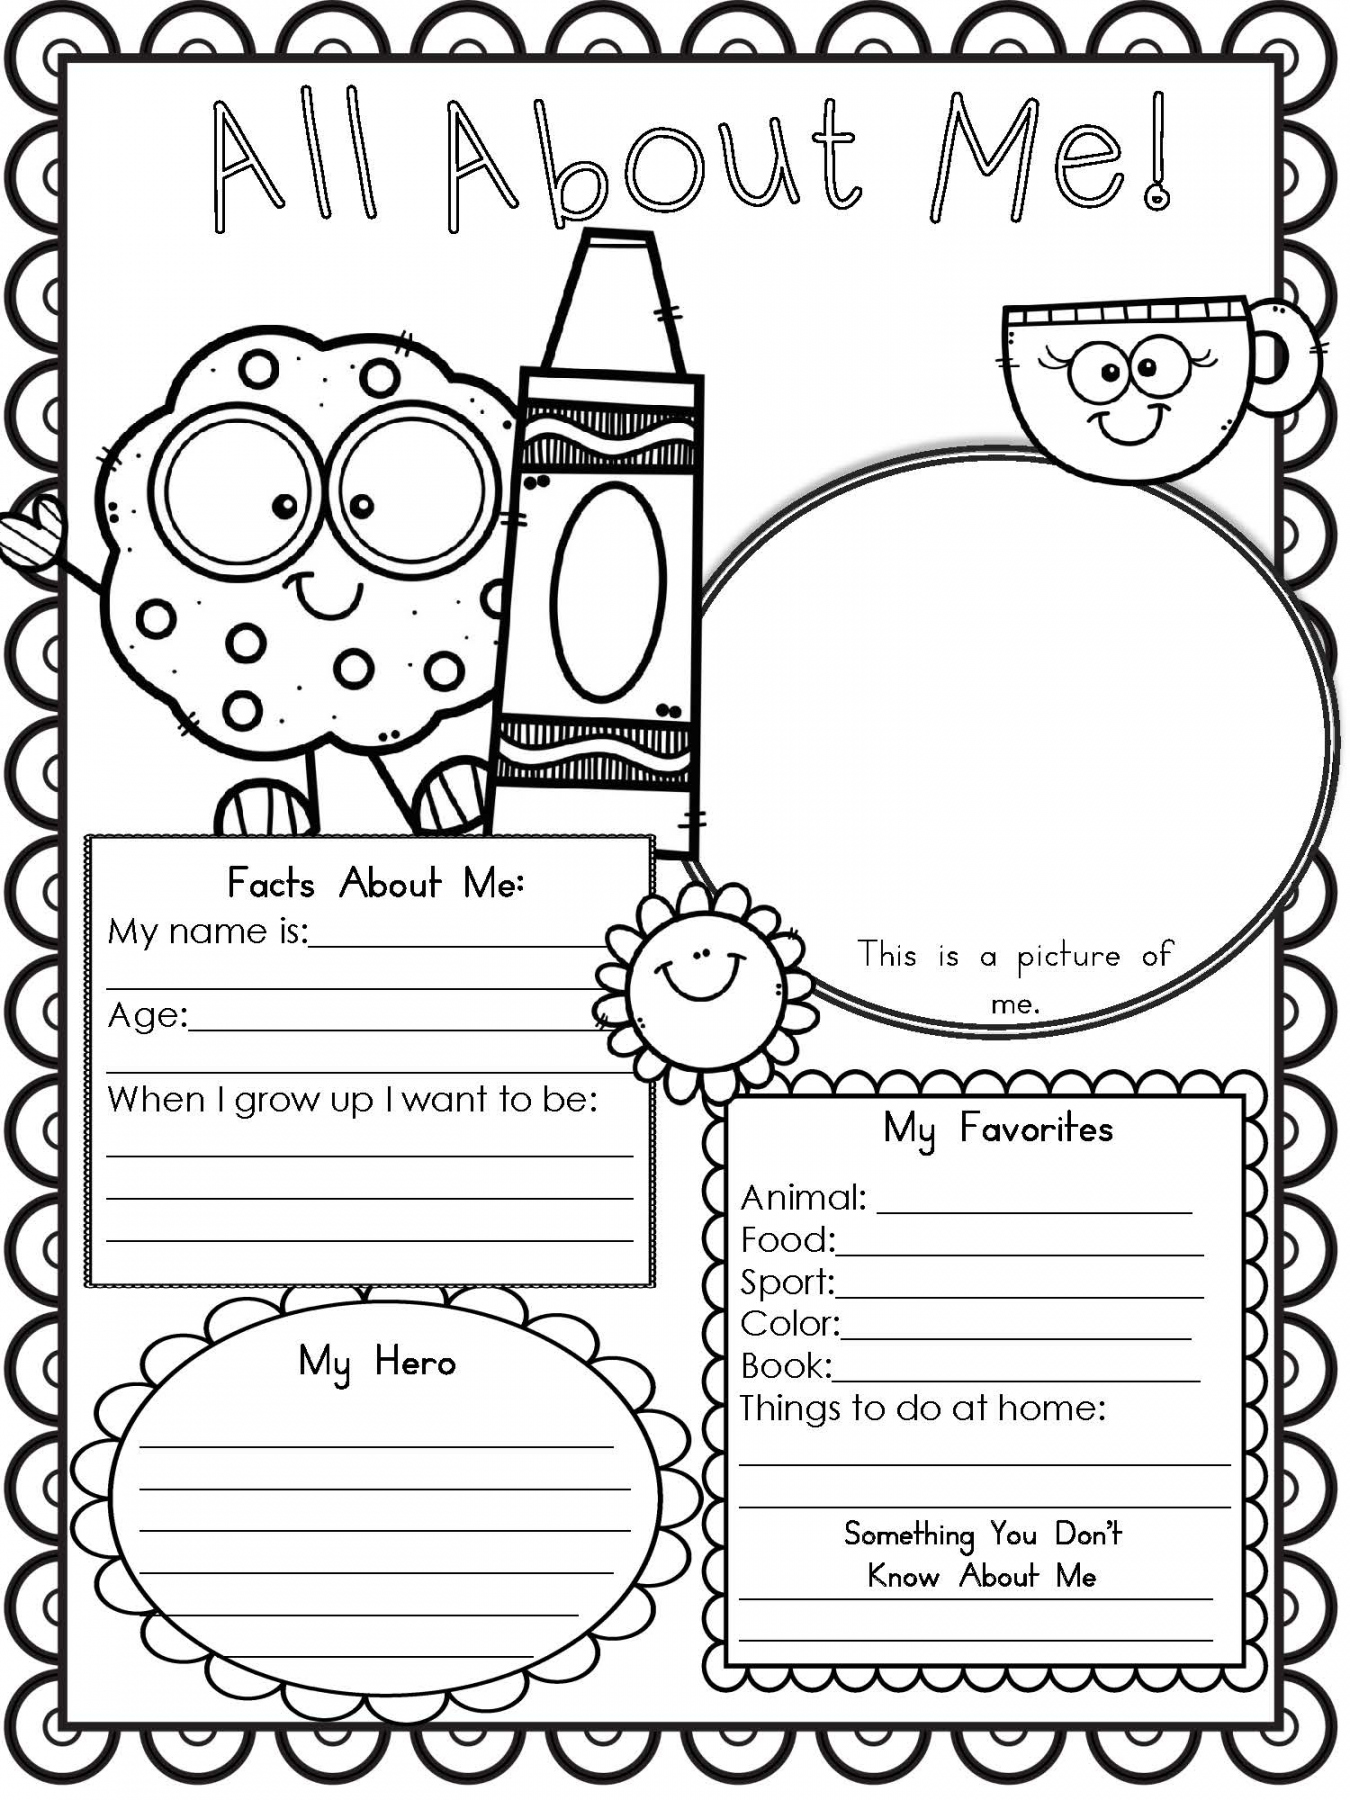 All About Me Free Printable 4th Grade